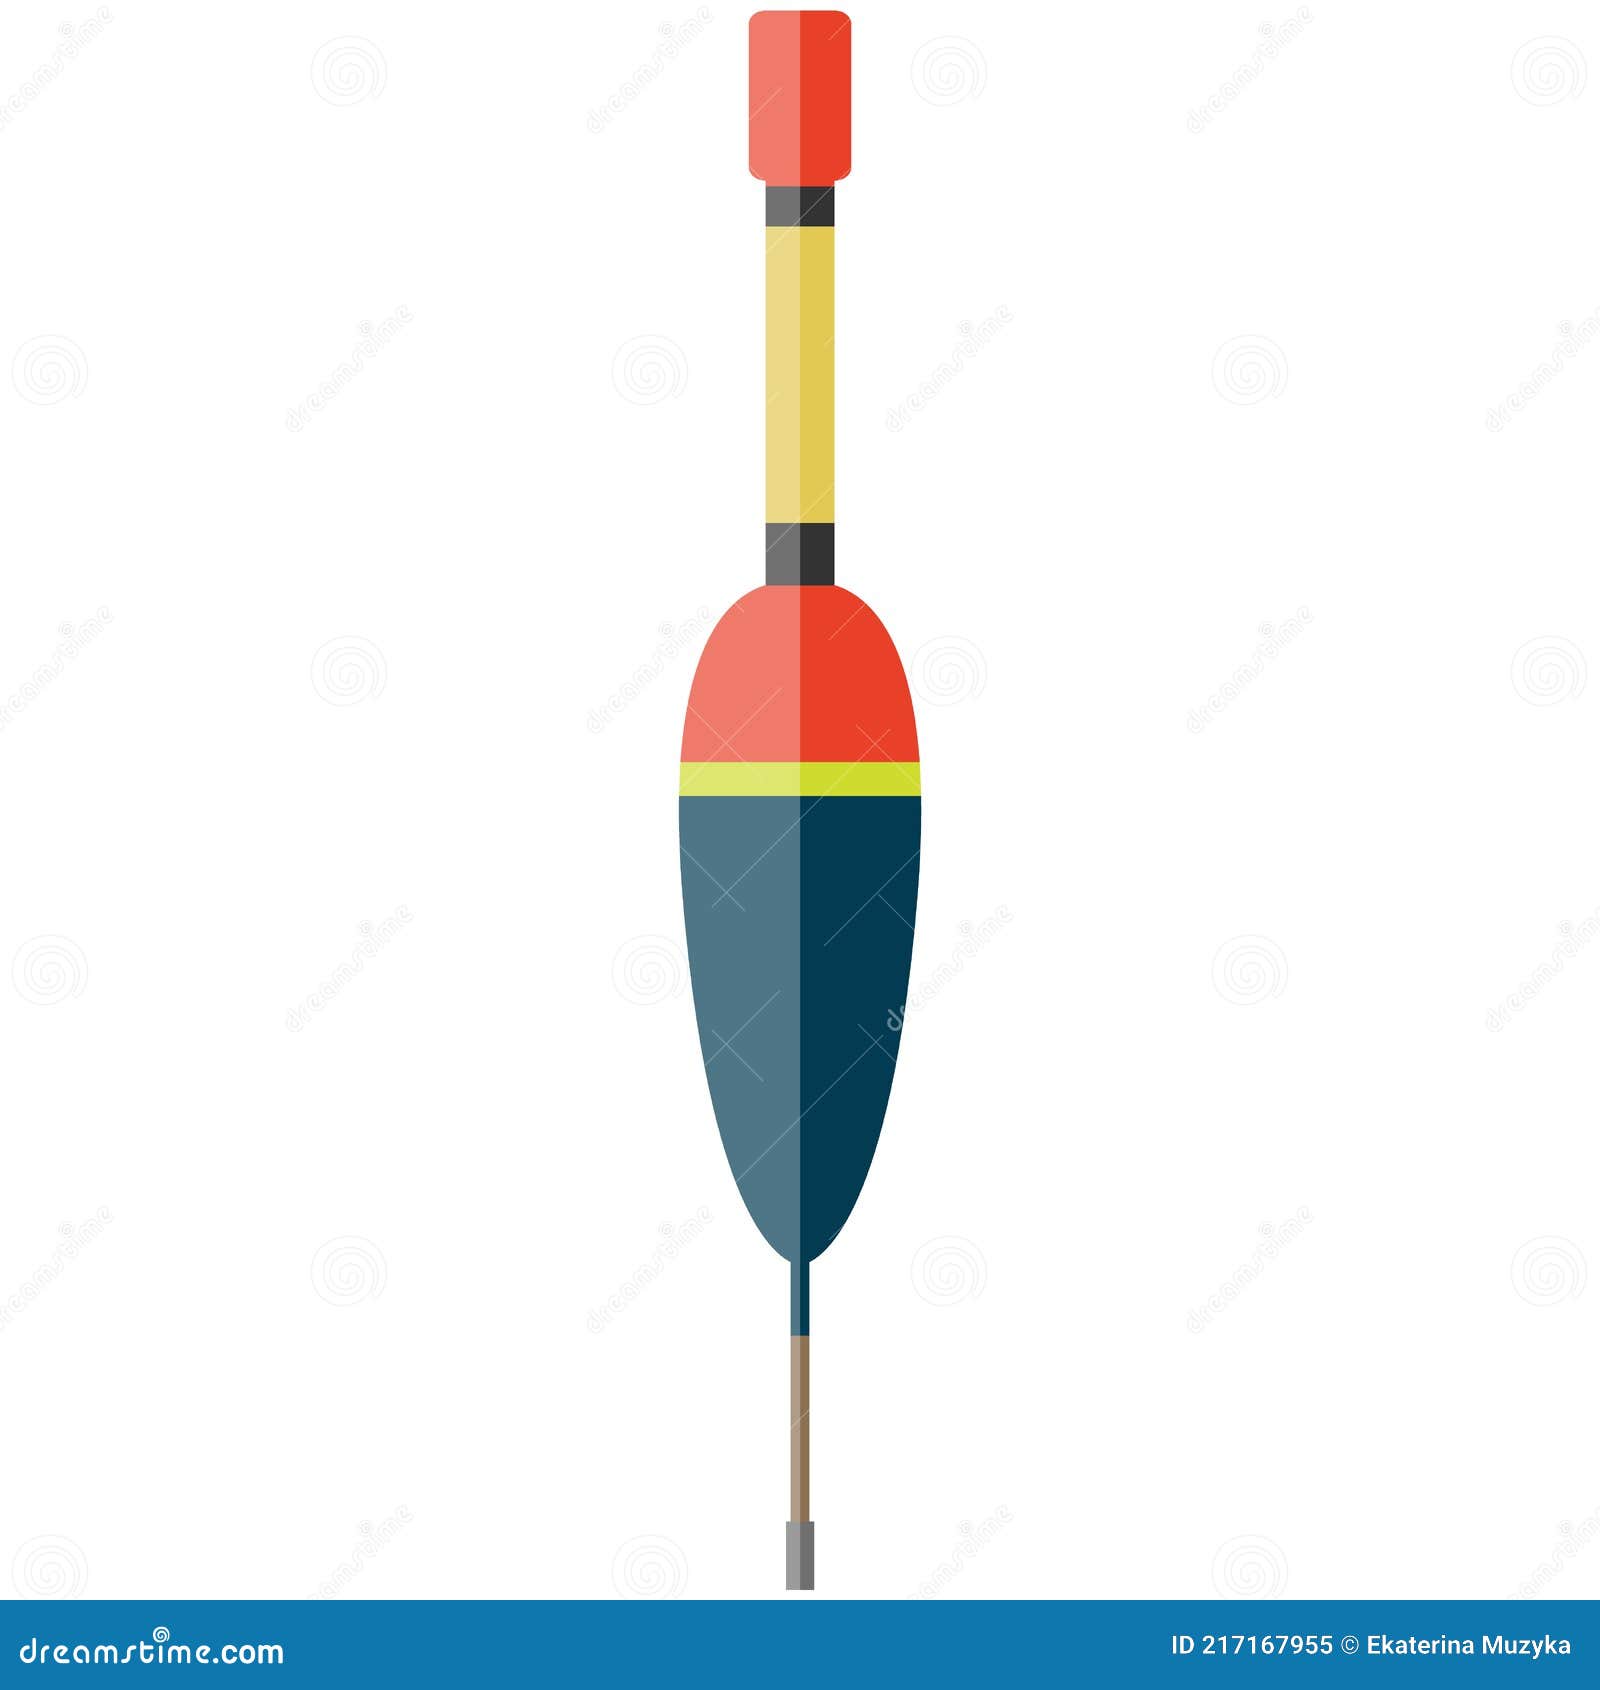 https://thumbs.dreamstime.com/z/vector-fishing-rod-bobber-tackle-illustration-isolated-vector-fishing-rod-bobber-tackle-illustration-isolated-white-background-217167955.jpg